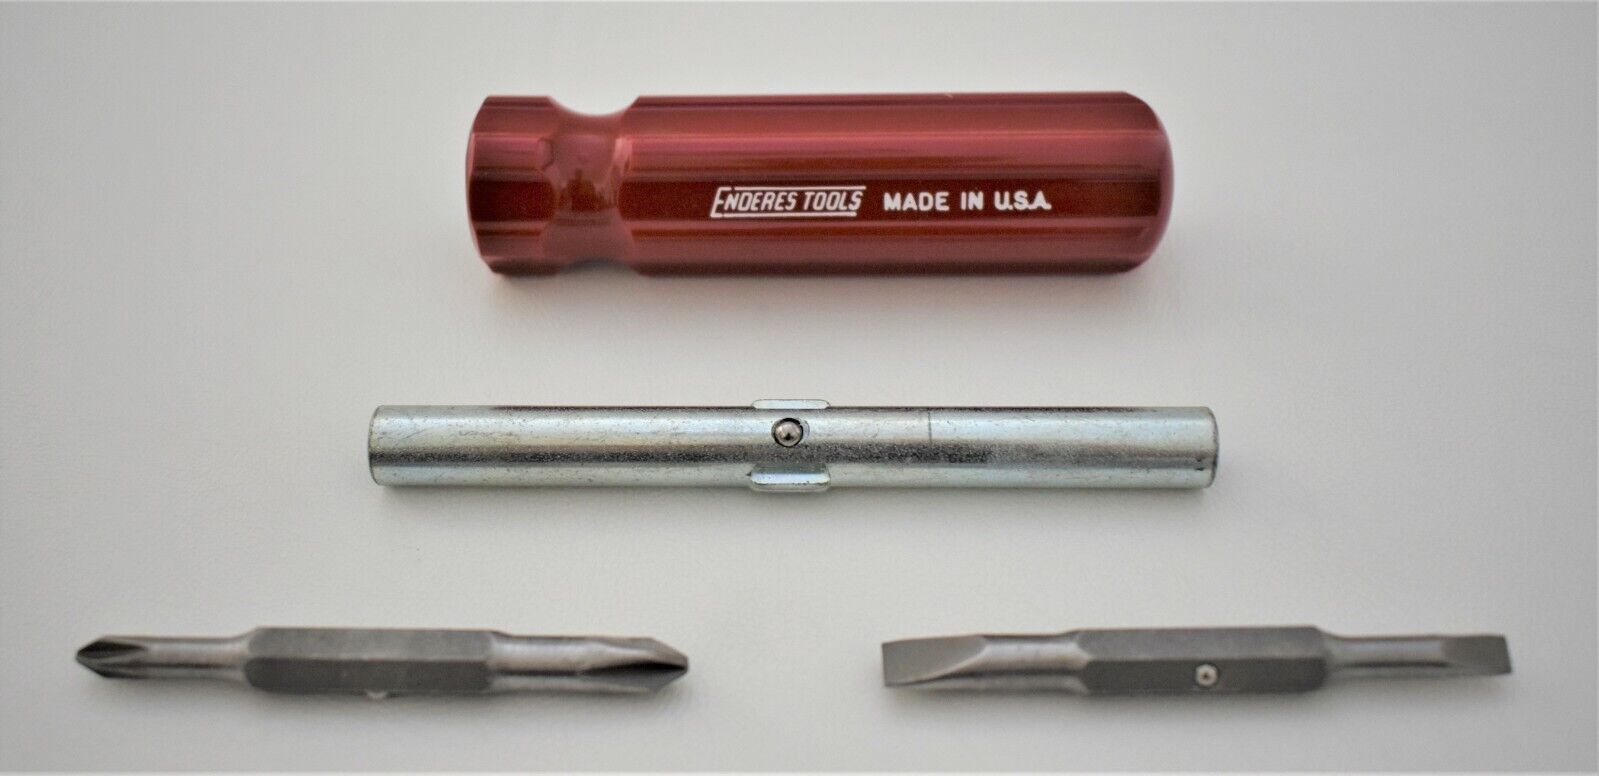 NEW Enderes Tool 8in Screwdriver 4 in 1 USA Phillips Slotted Multi Bit Driver